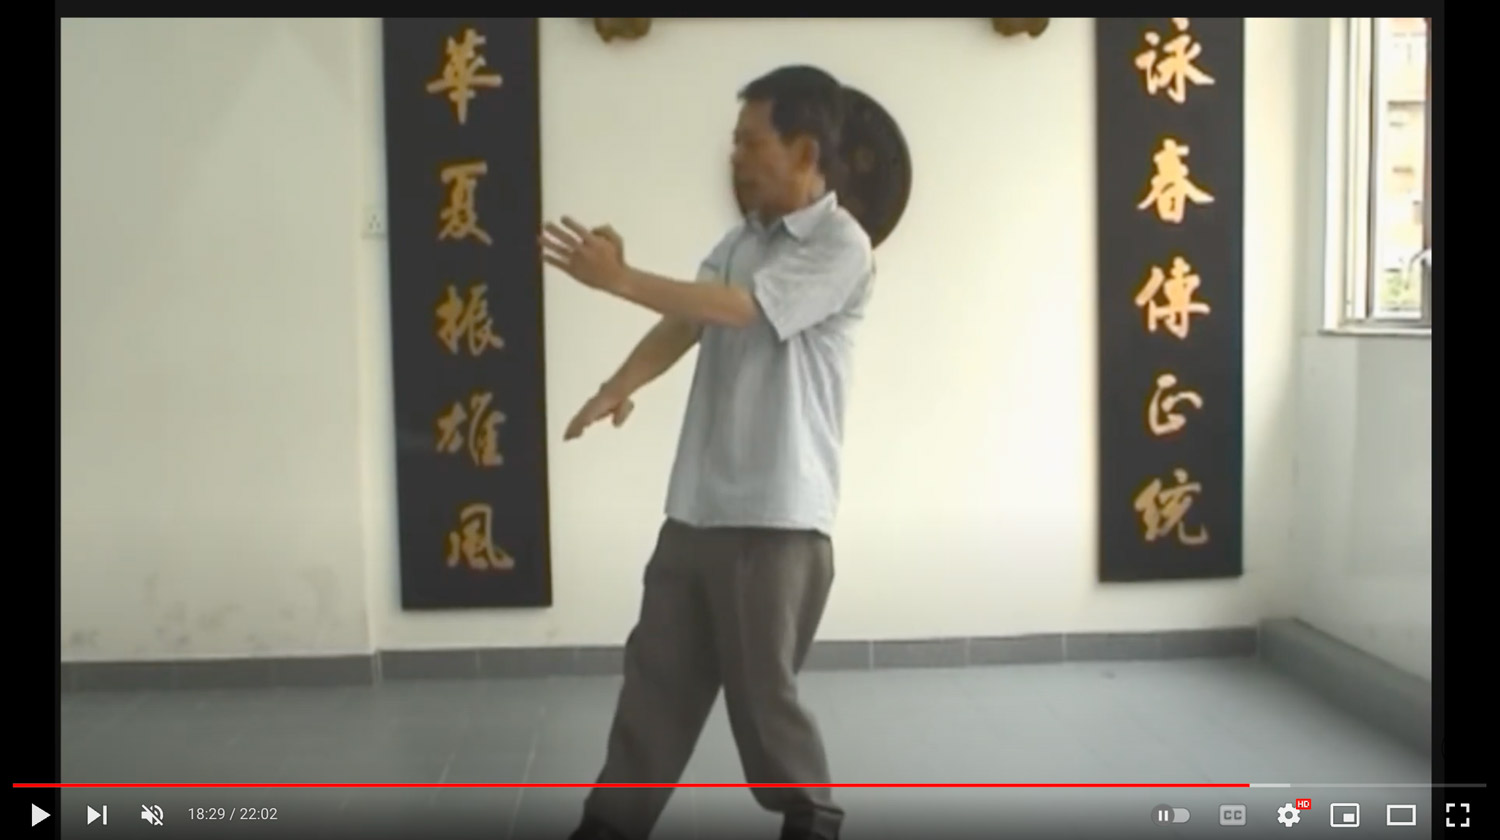 ct-wing-chun-ng-wah-sum-archive-video-Feature-2022